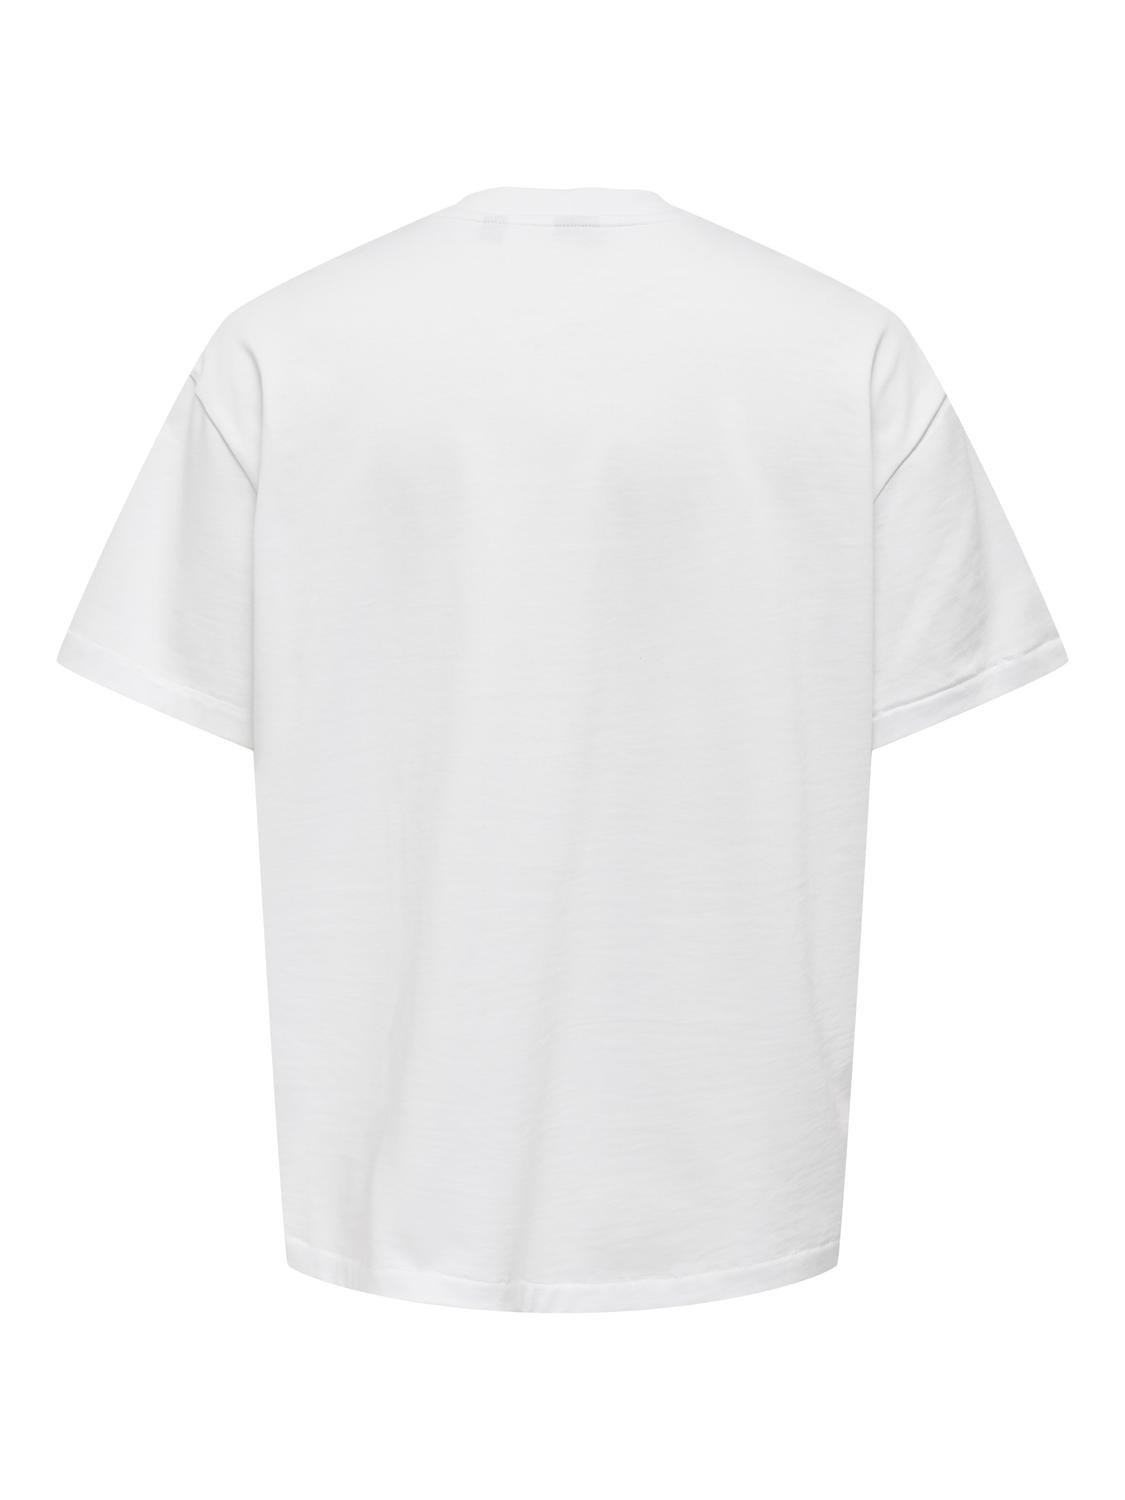 ONLY & SONS Oversize Fit Round Neck T-Shirt -Bright White - 22027787